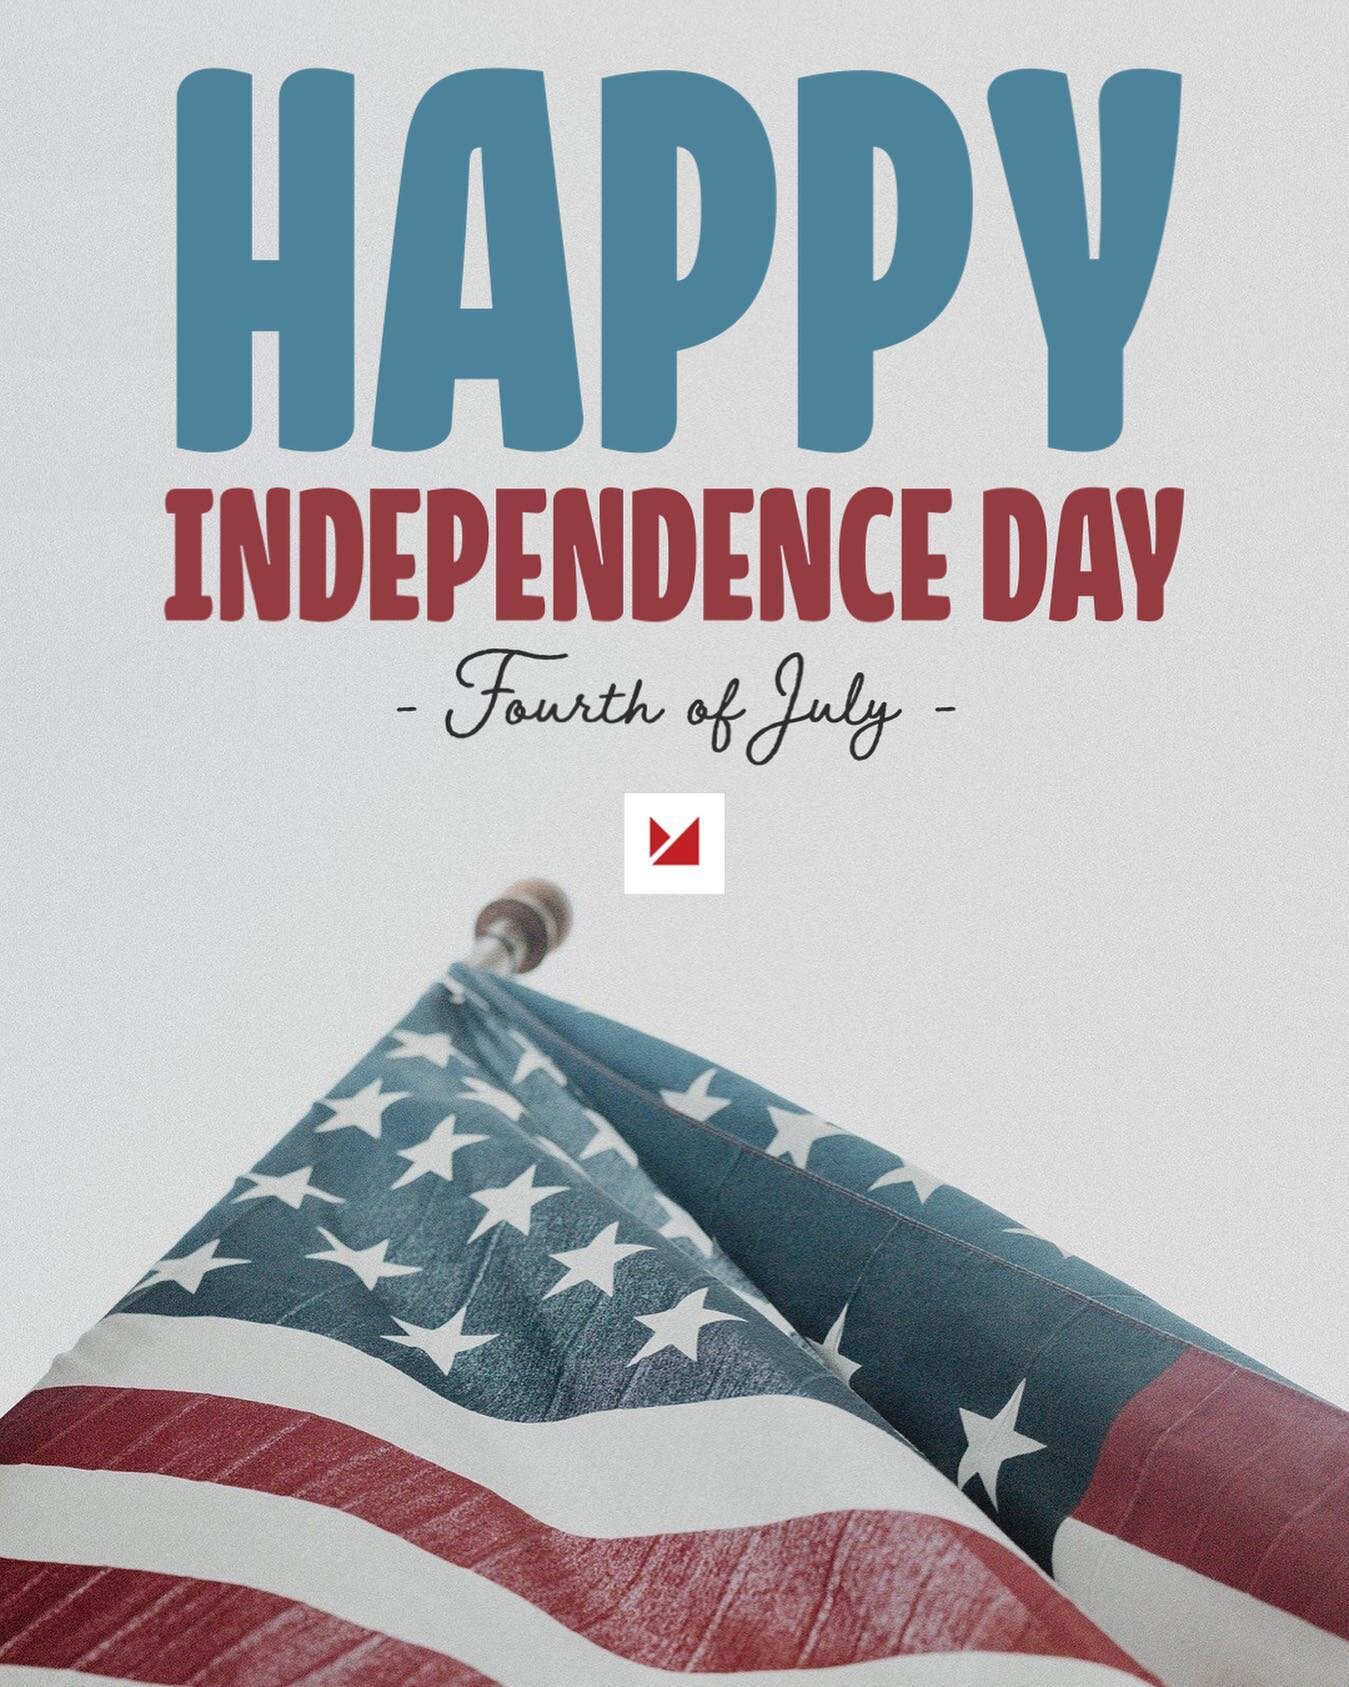 We wish you and your family a happy &amp; safe Independence Day! #Happy4th #July4th 🎇🇺🇸